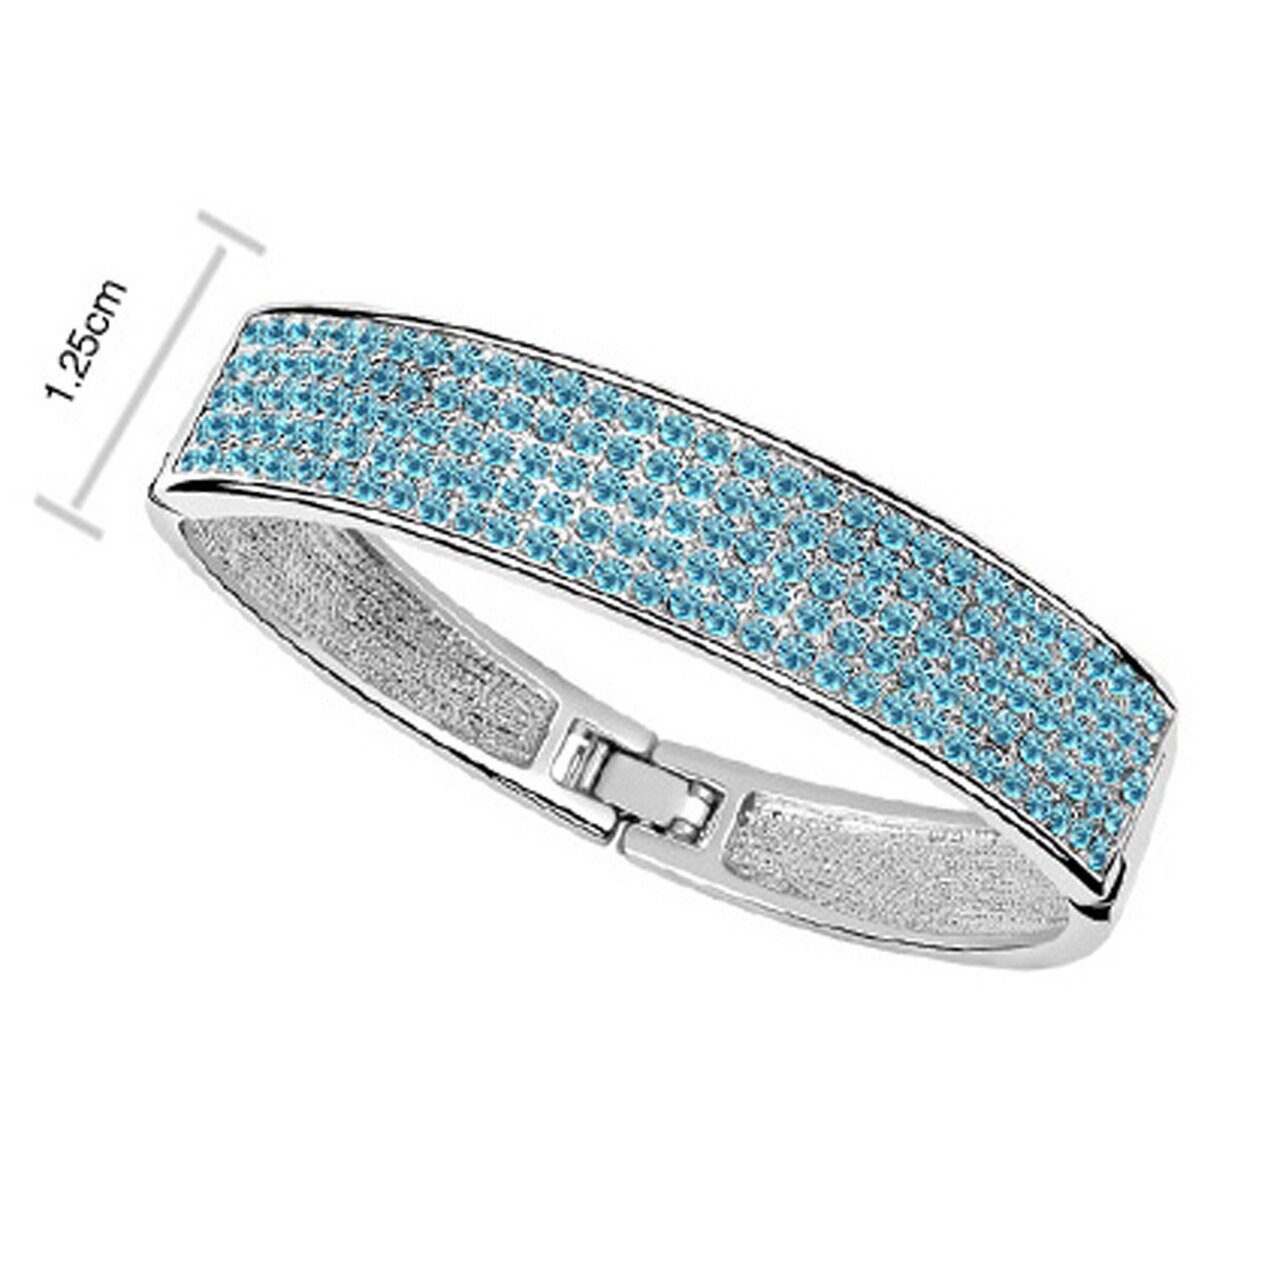 Dazzling Crystal Diamante Clip on Cuff Bangle Bracelet in clear blue pink and purple